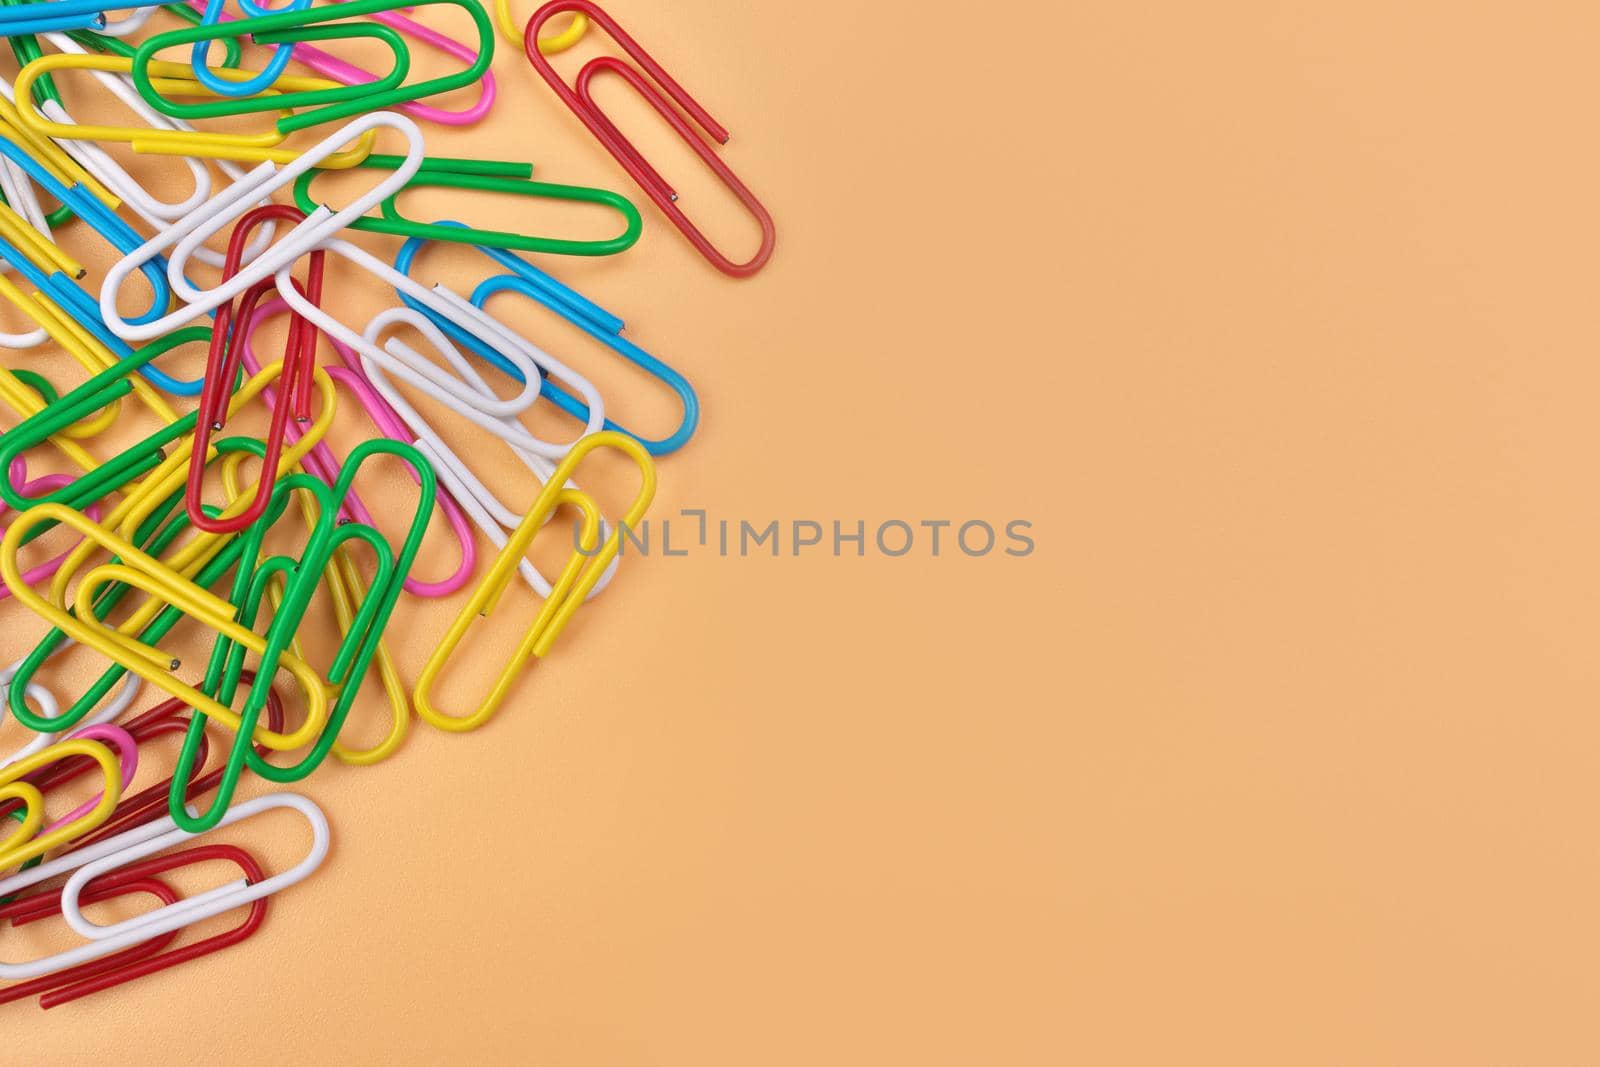 Multicolored Paperclips Isolated on a Cheerful Orange Beige Background with Copy Space on Right by markvandam